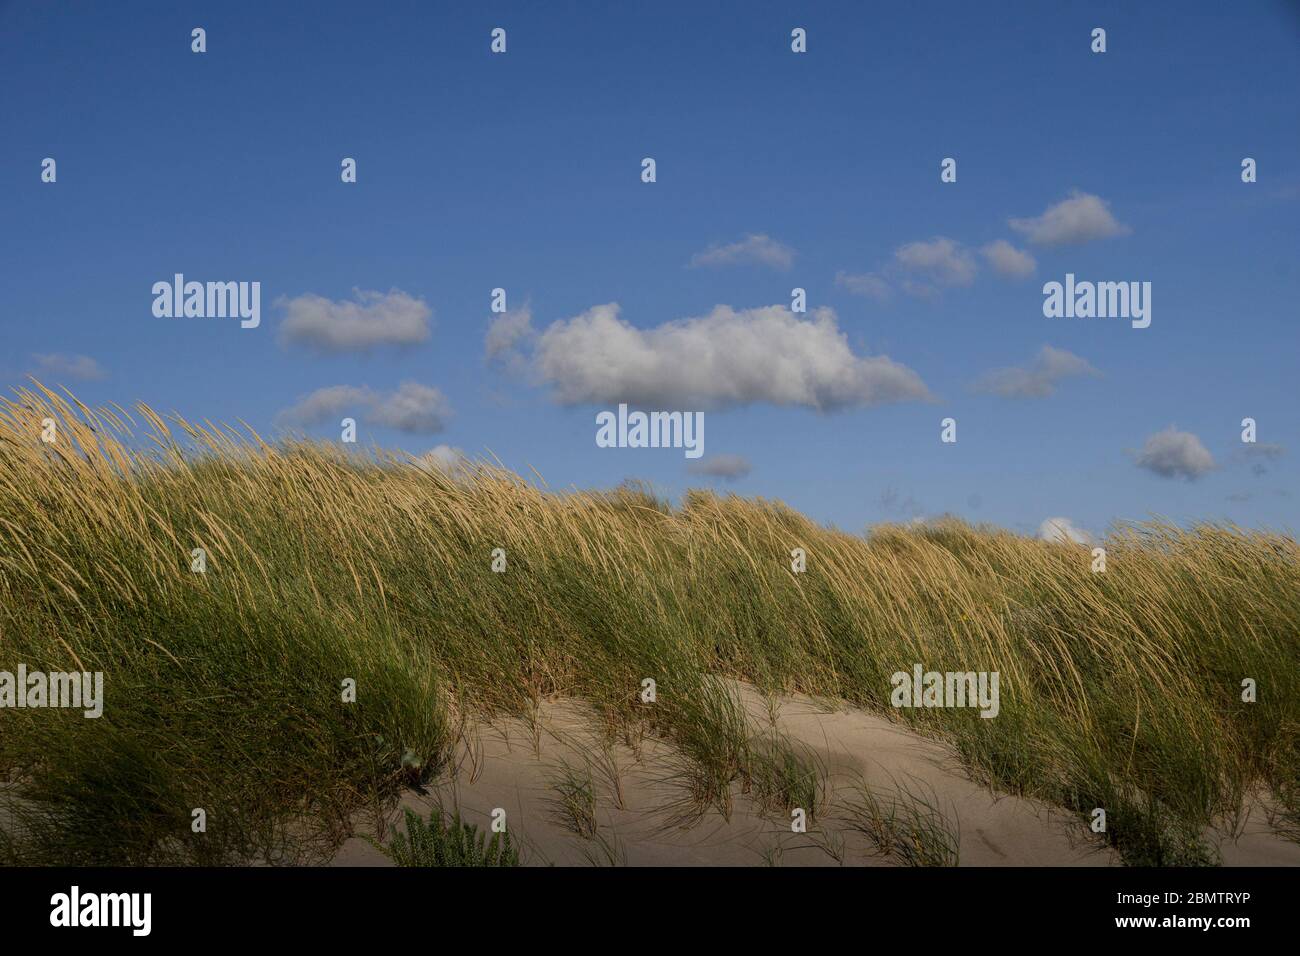 Minimalist landscape of green grassy dunes on the beach, with clouds above in the blue sky Stock Photo